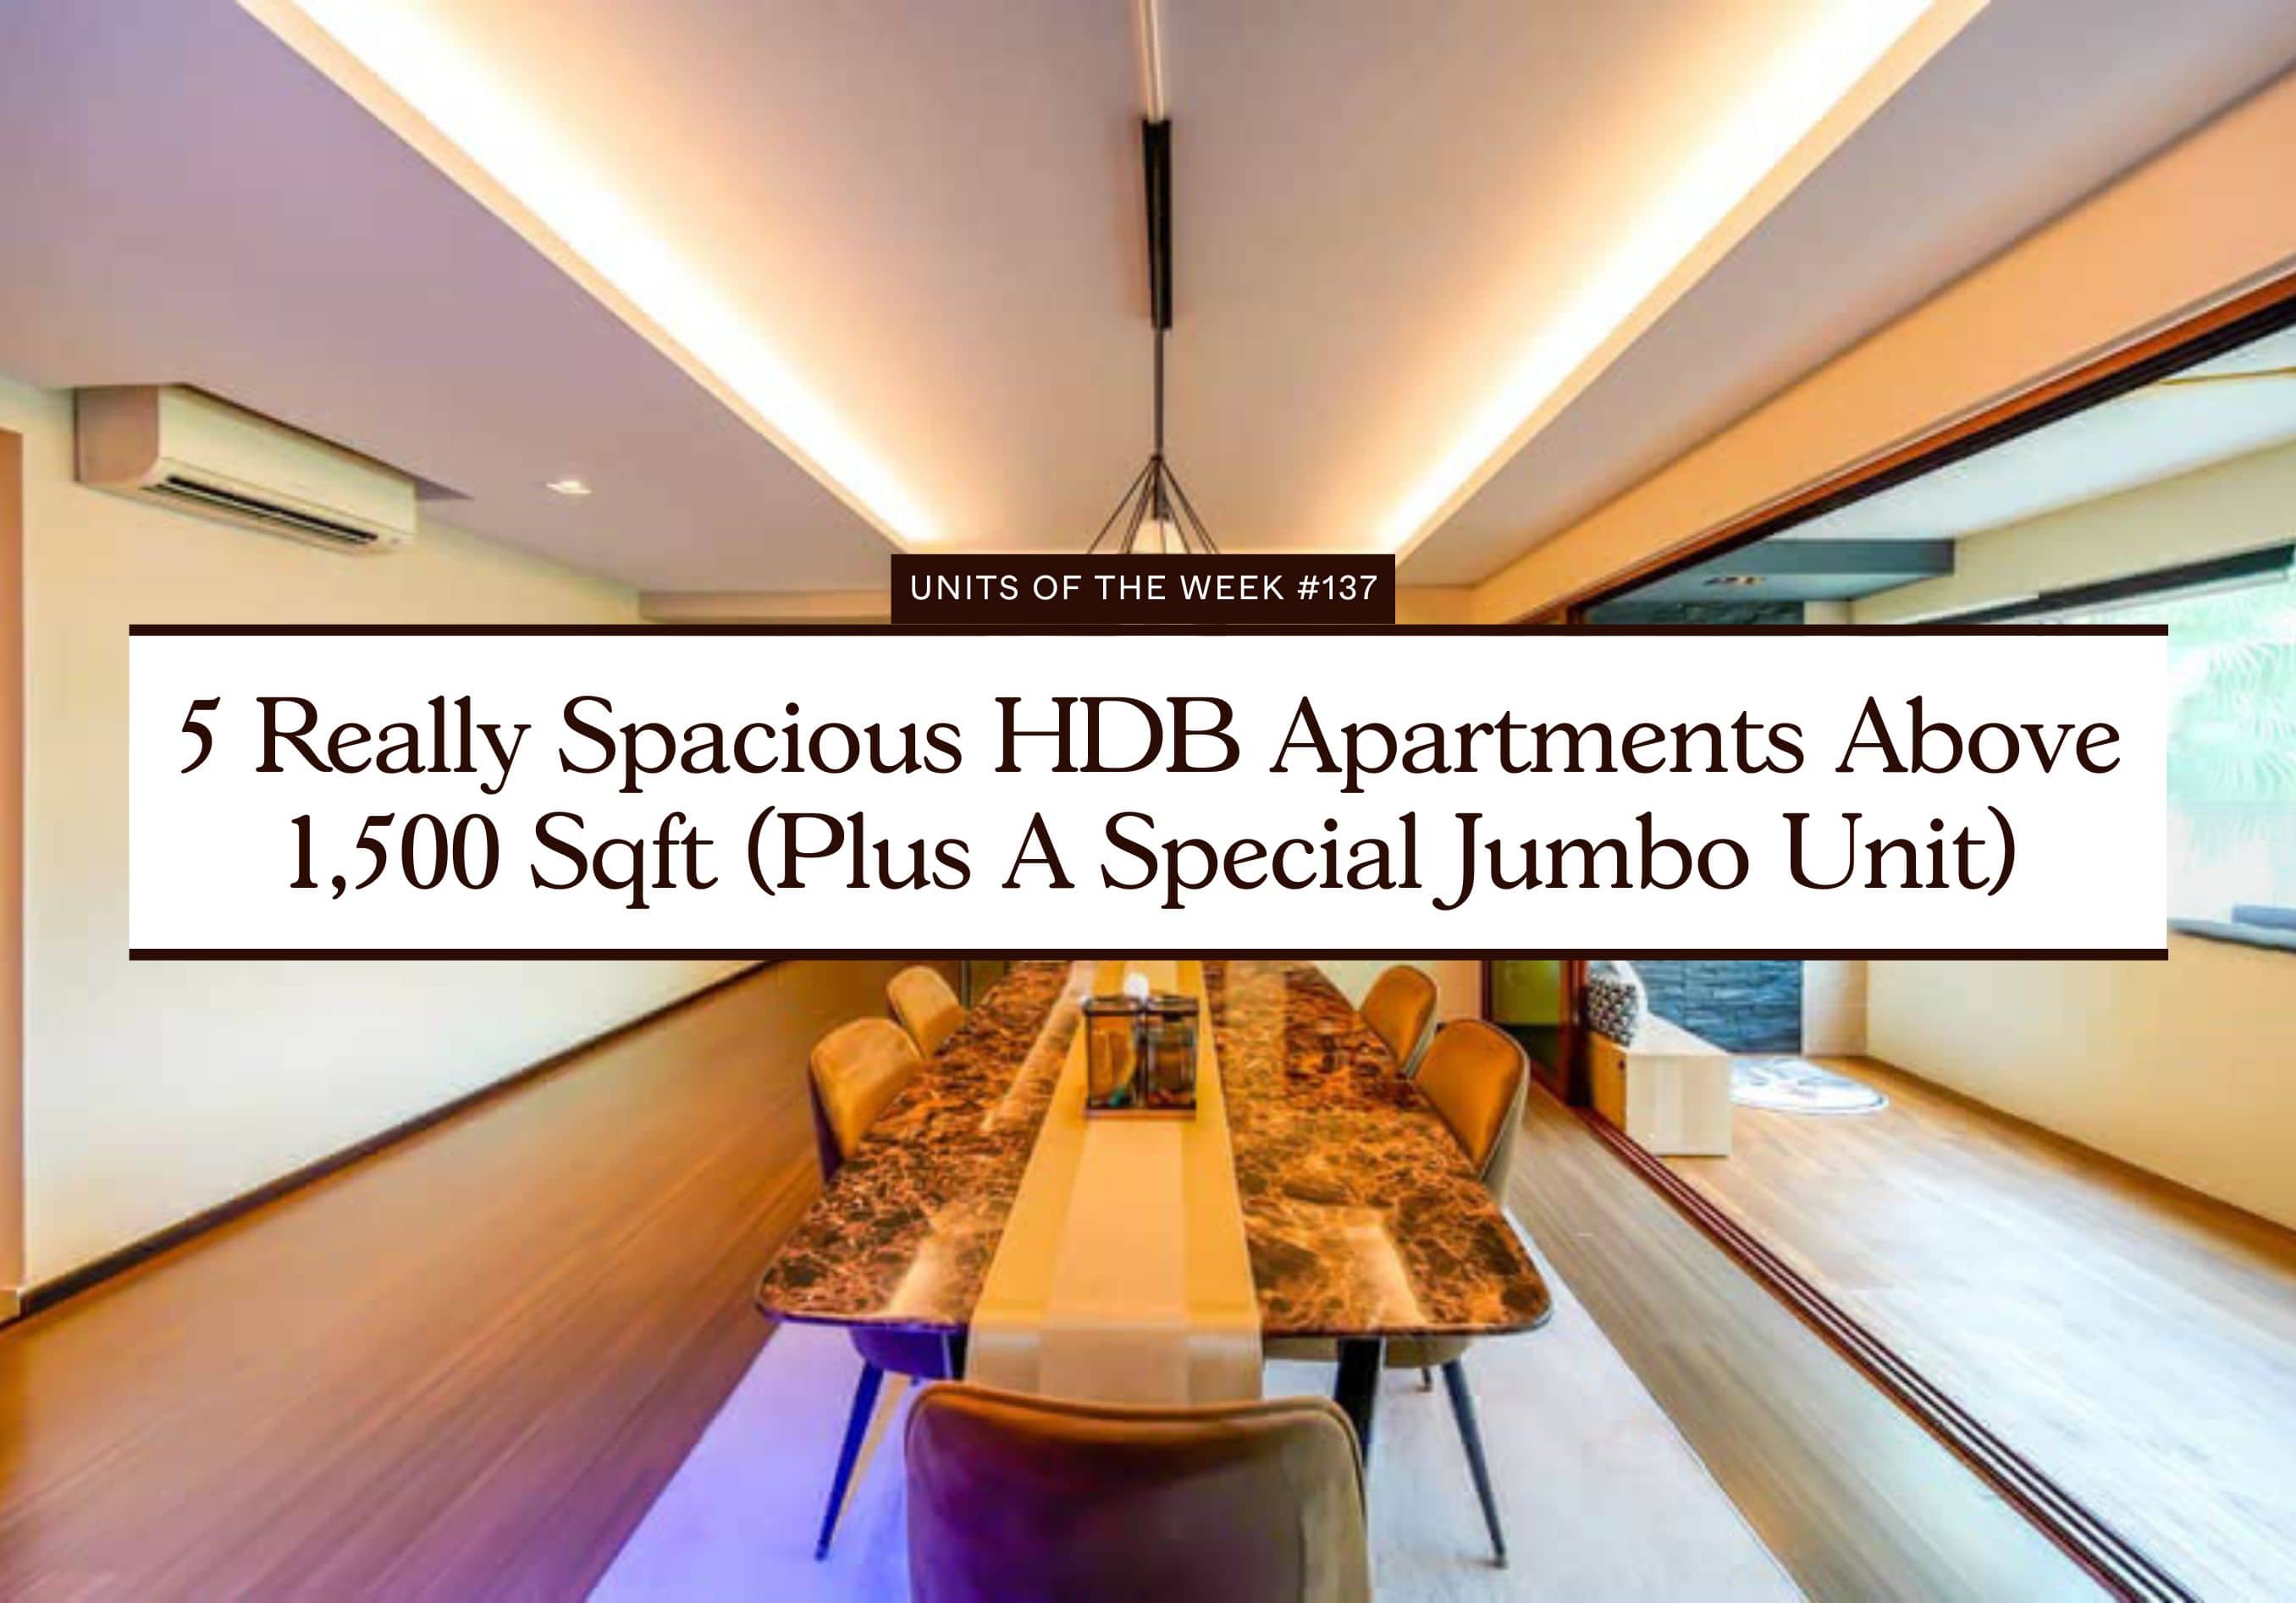 5 Really Spacious HDB Apartments Above 1500 Sqft Plus A Special Jumbo Unit 1